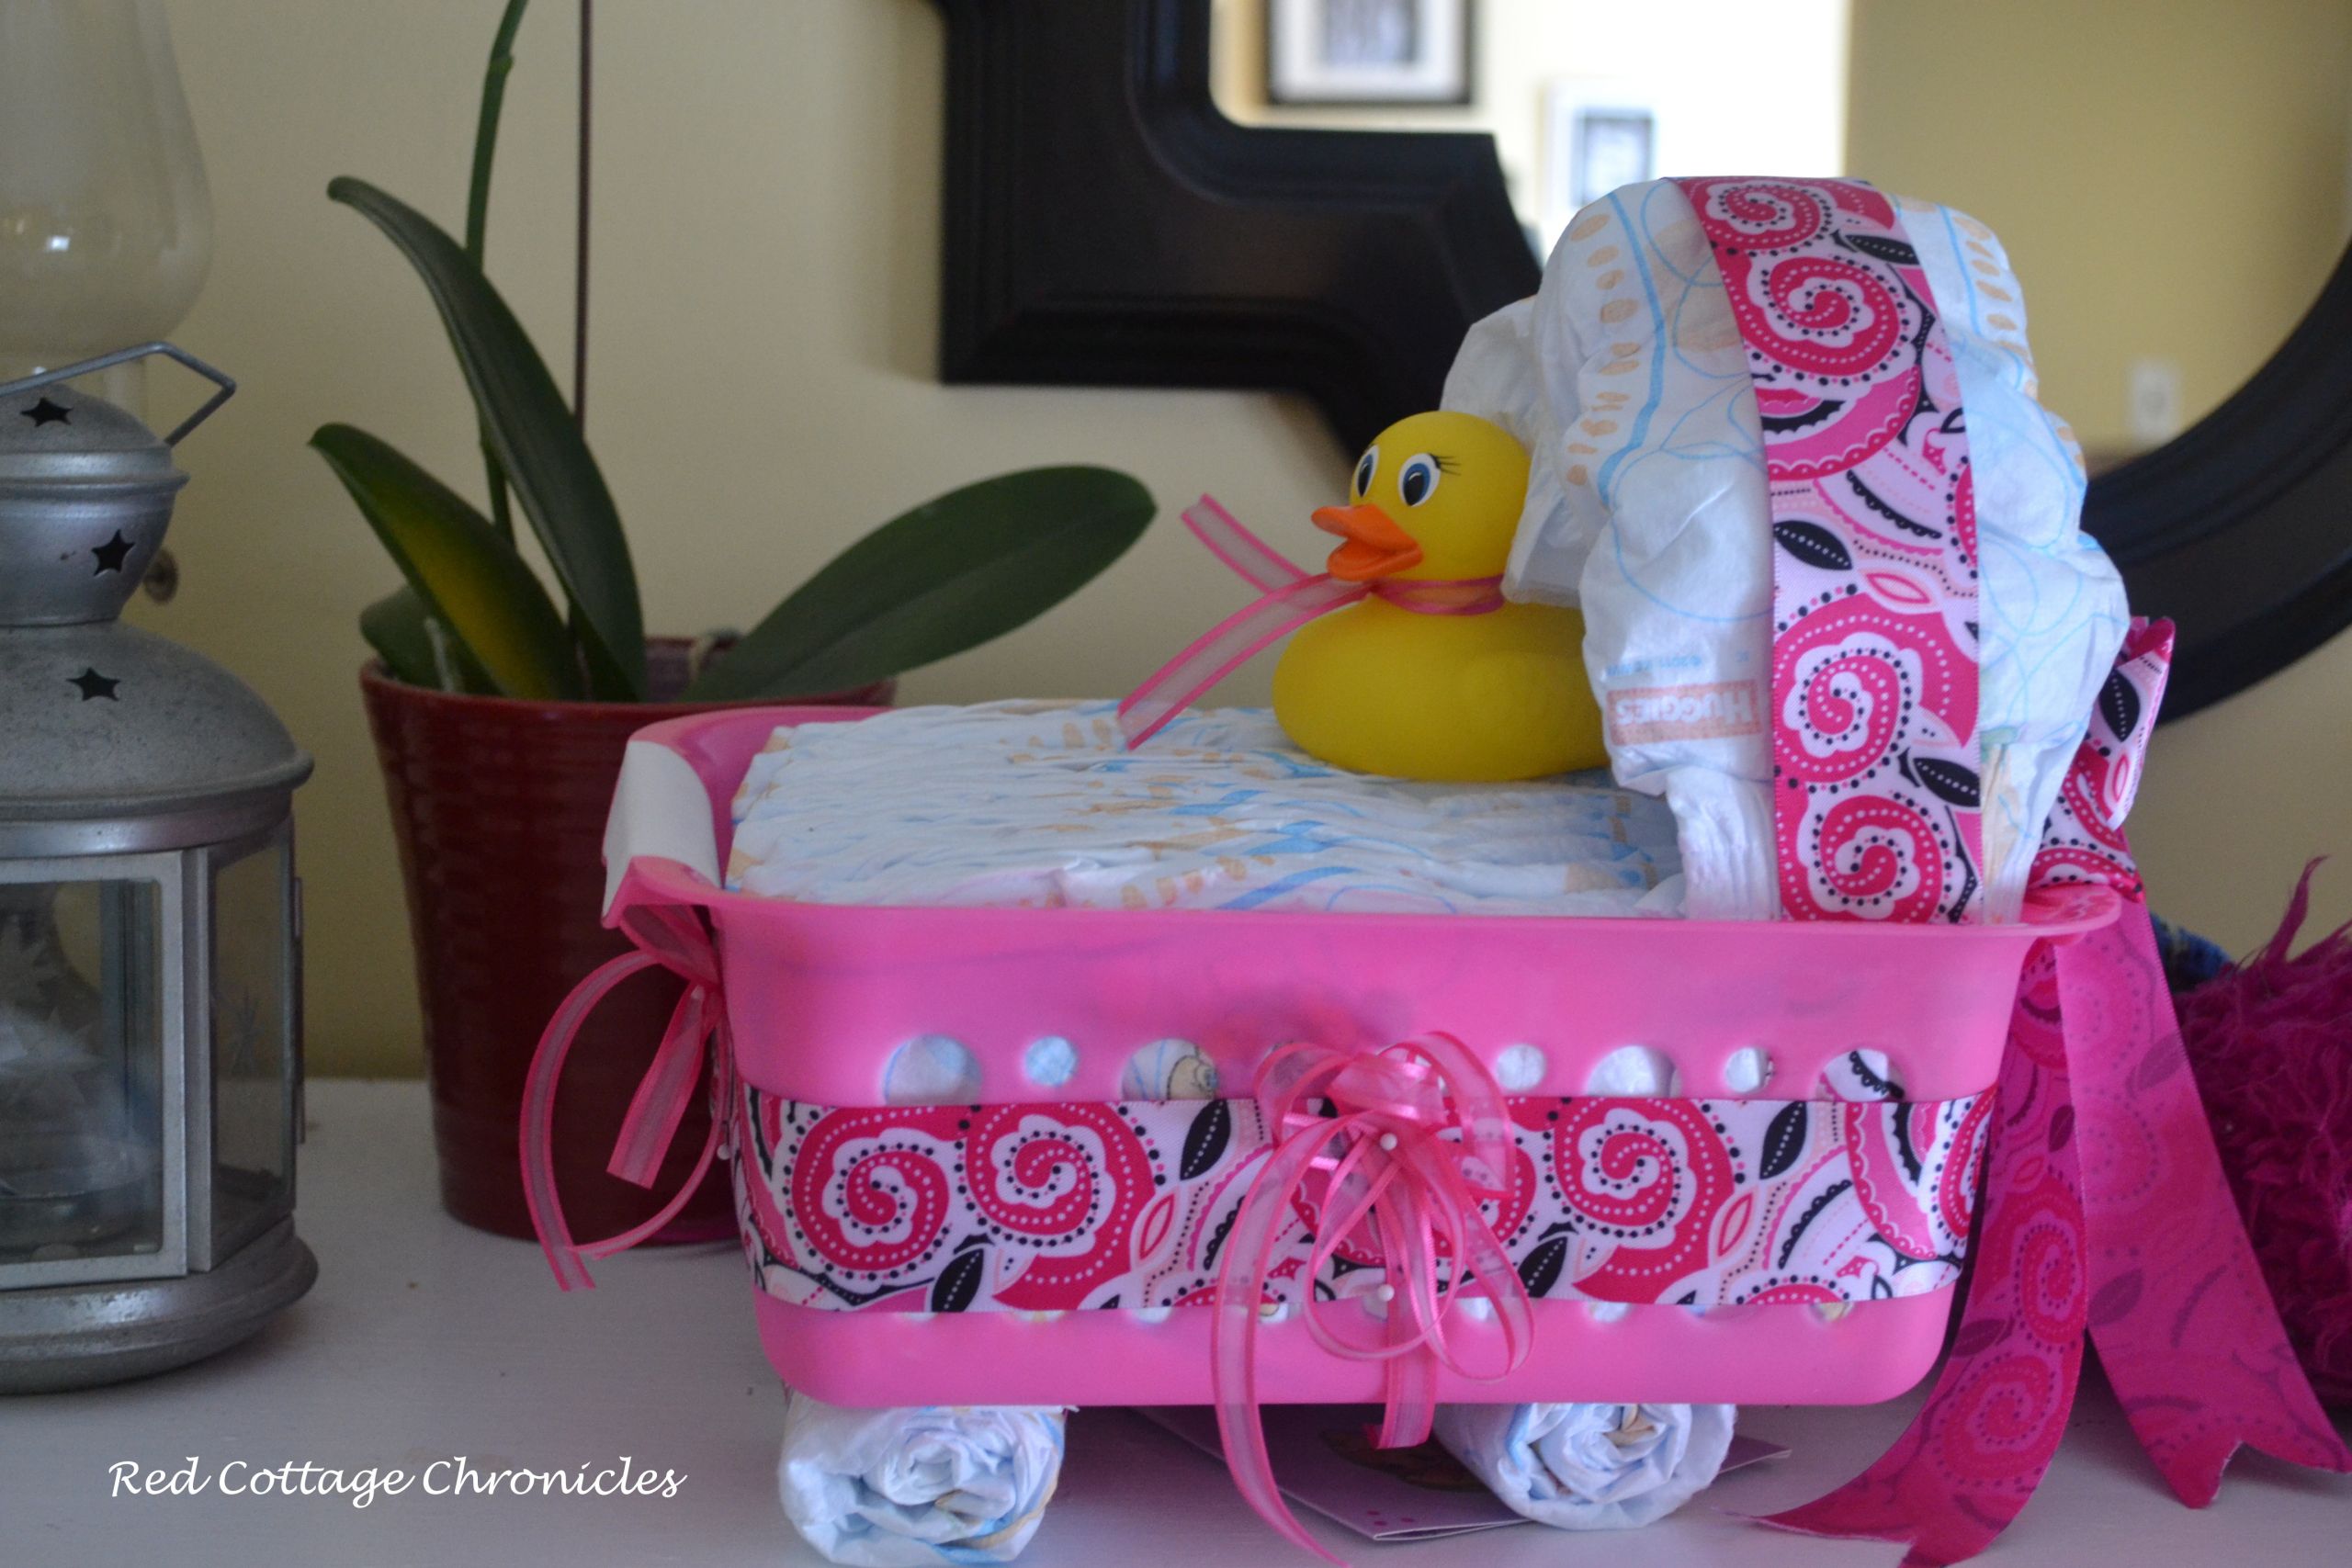 Crafty Baby Shower Gift Ideas
 This Baby Shower Gift Idea is a practical t any new mom